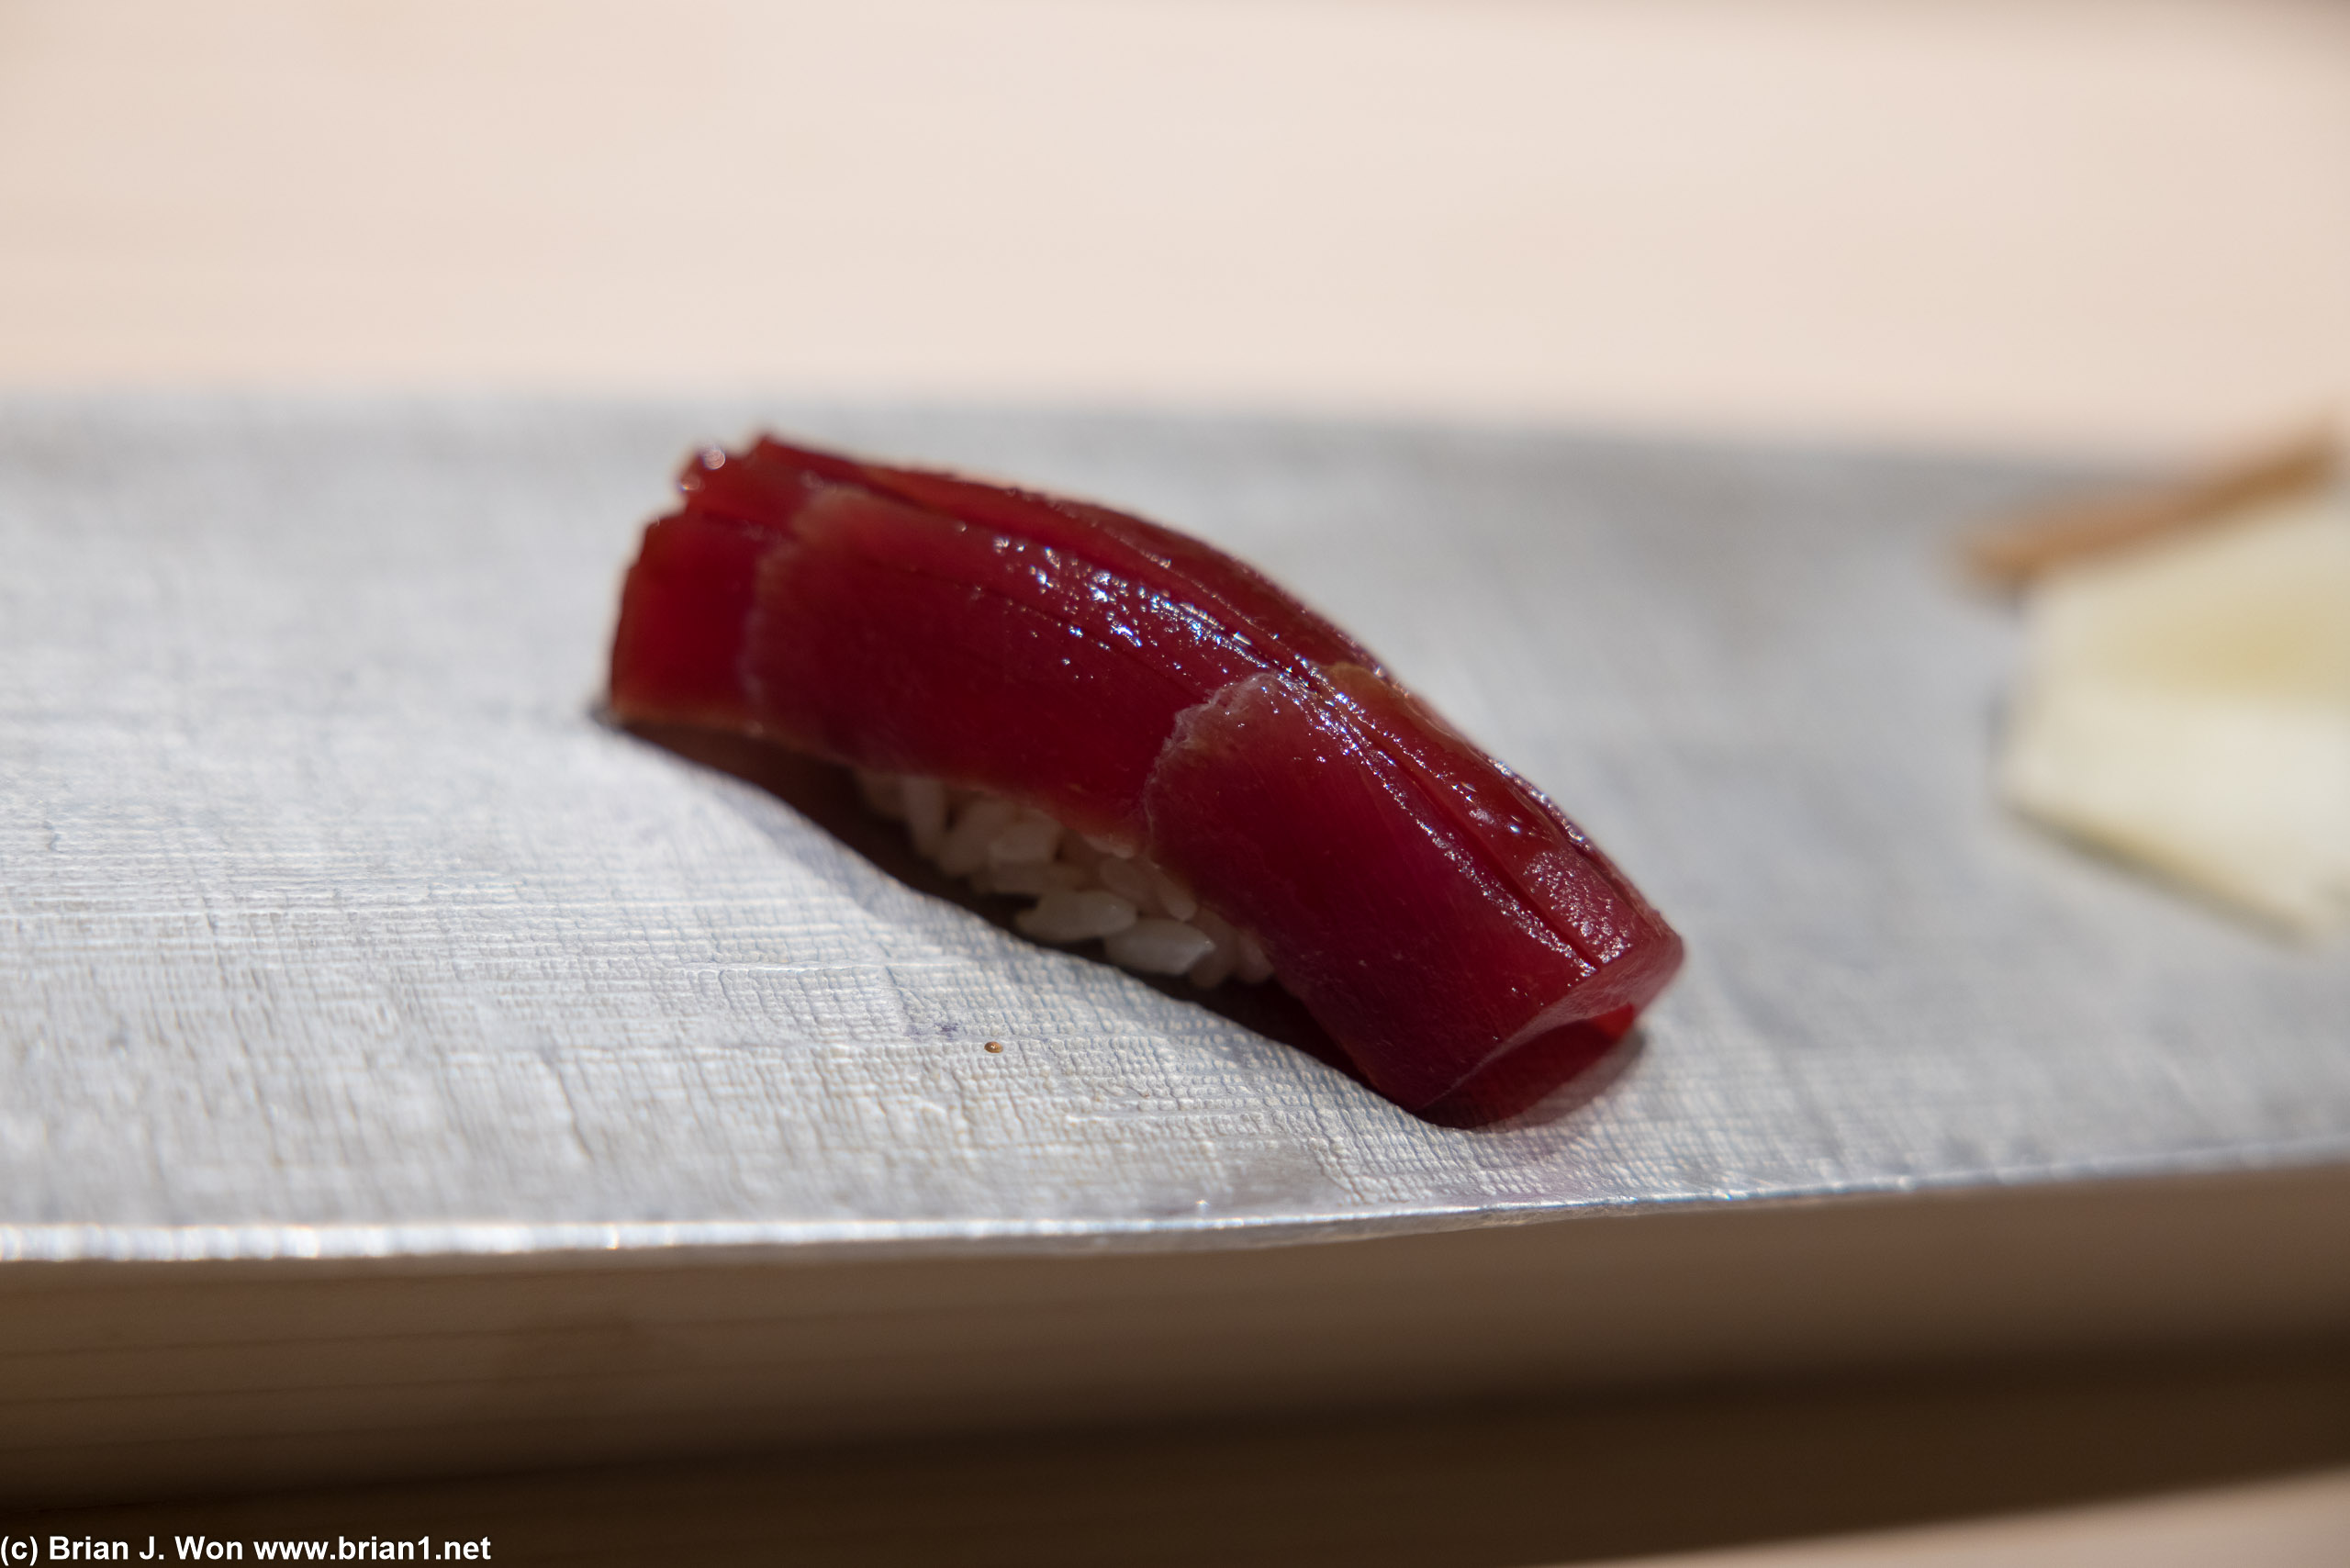 Maguro was perfection.